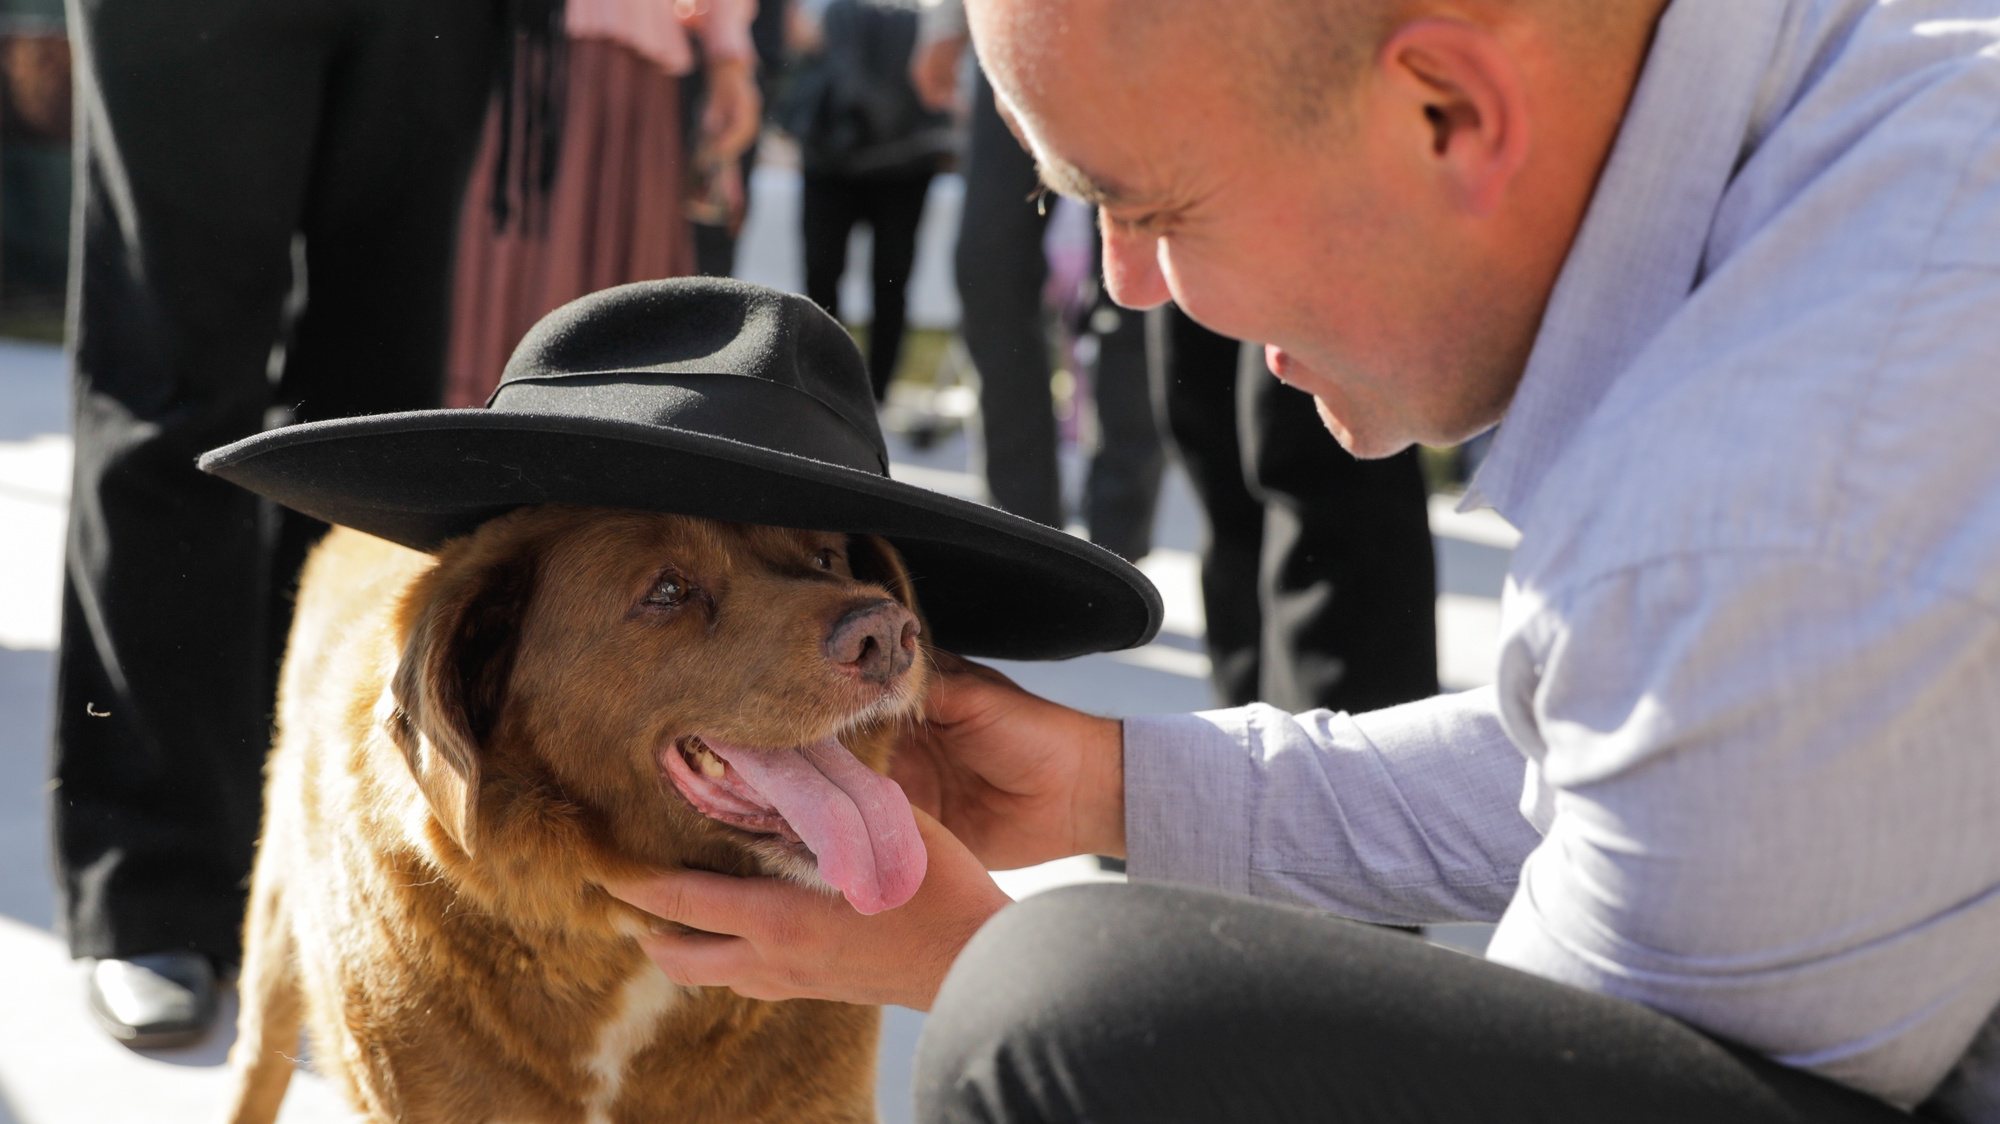 Leonel Costa plays with Bobi, a 31-year-old dog, that has celebrated his birthday as a celebrity in rural village of Conqueiros, in Leiria, central Portugal after being declared the world&#039;s oldest dog ever two months ago by Guinness World Records, Leiria, 13 May 2023. Bobi&#039;s owner kept him in secret as a child after his parents said they couldn&#039;t keep the litter of new pups. His owners attribute his longevity to his diet of human food. PAULO CUNHA/LUSA